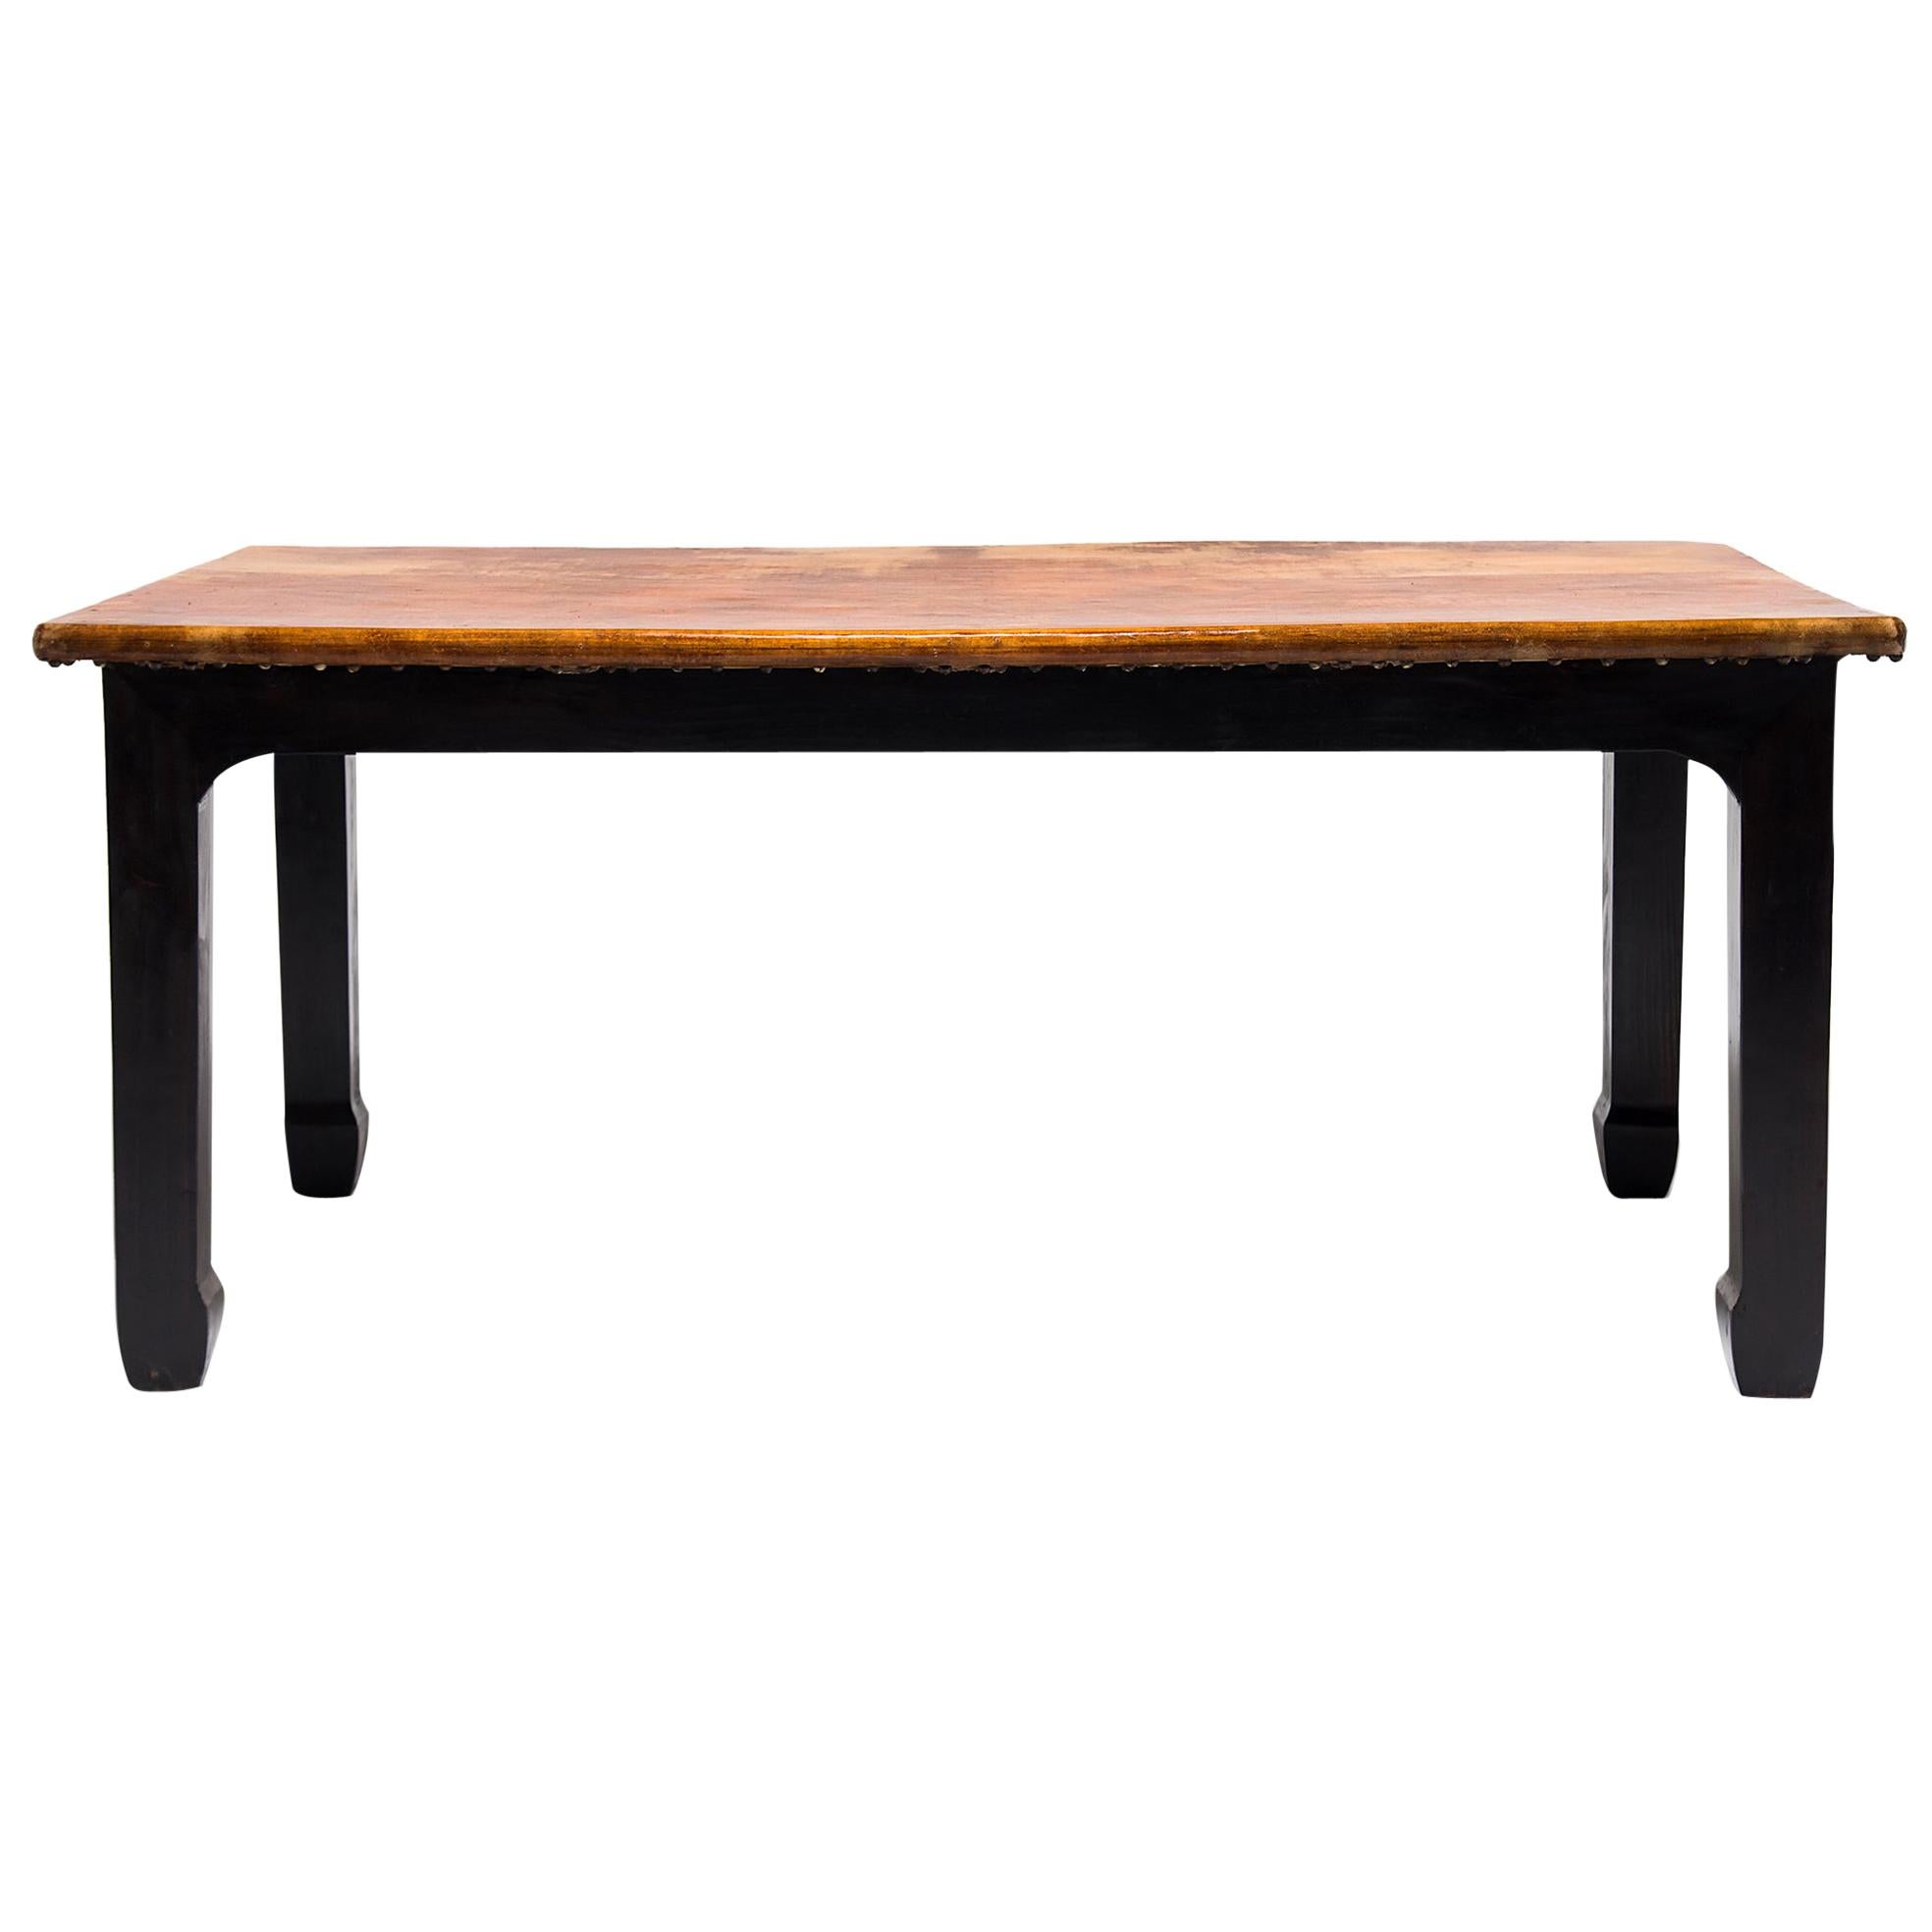 Chinese Hide Covered Artisan Table